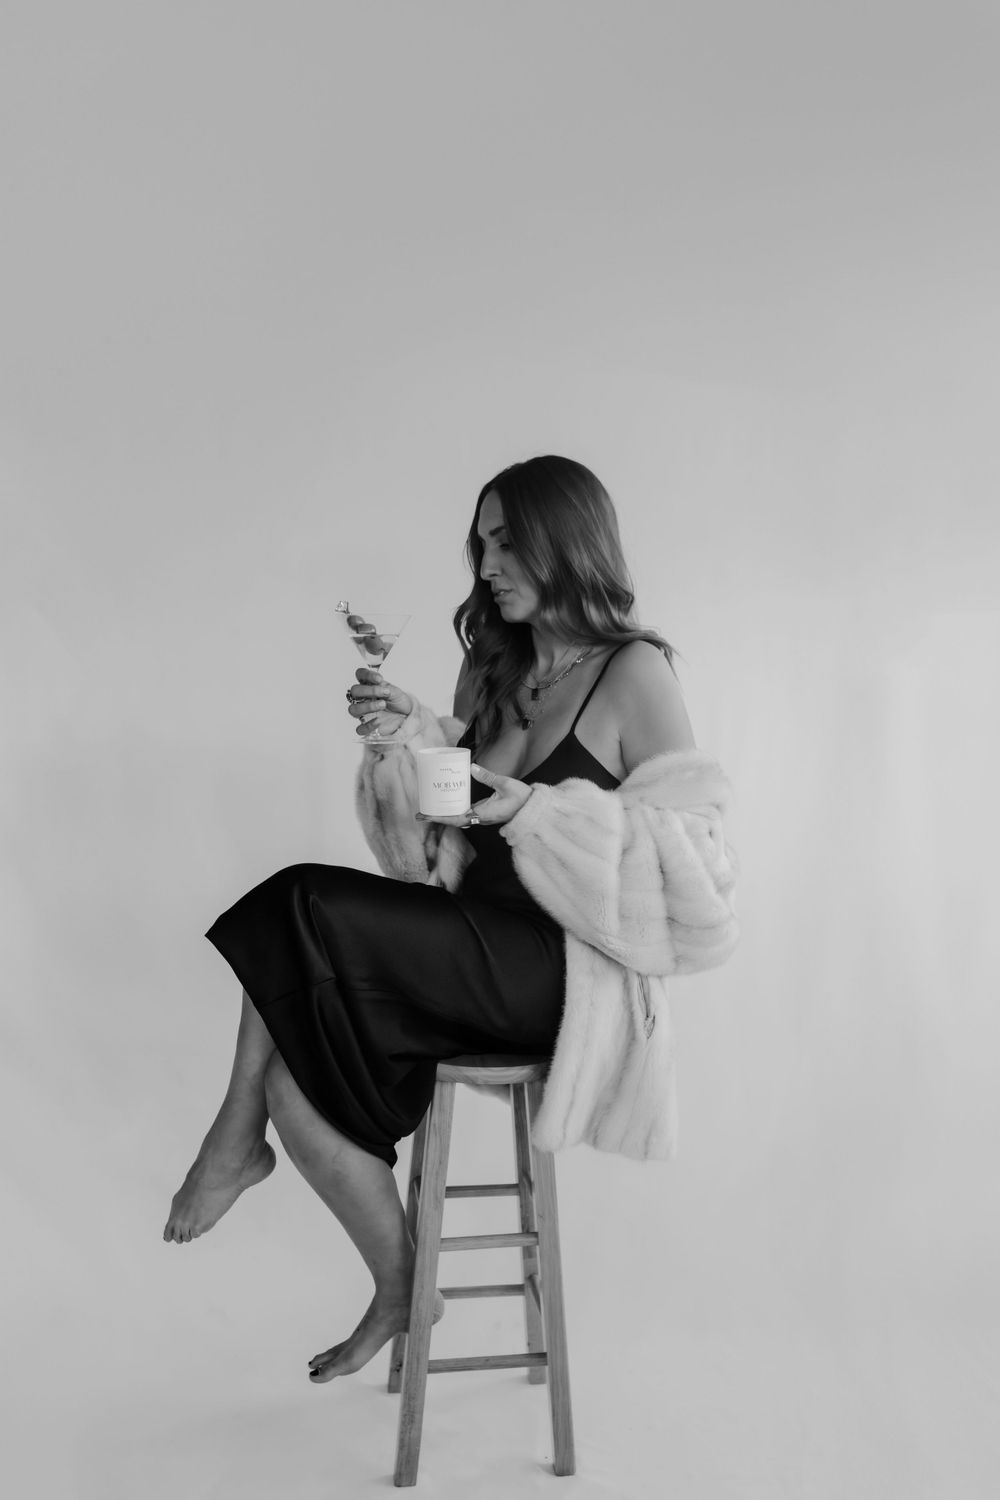 woman sitting on stool with mob wife mentality holding martini and candle in studio session by katherine krakowski lake tahoe reno photographer